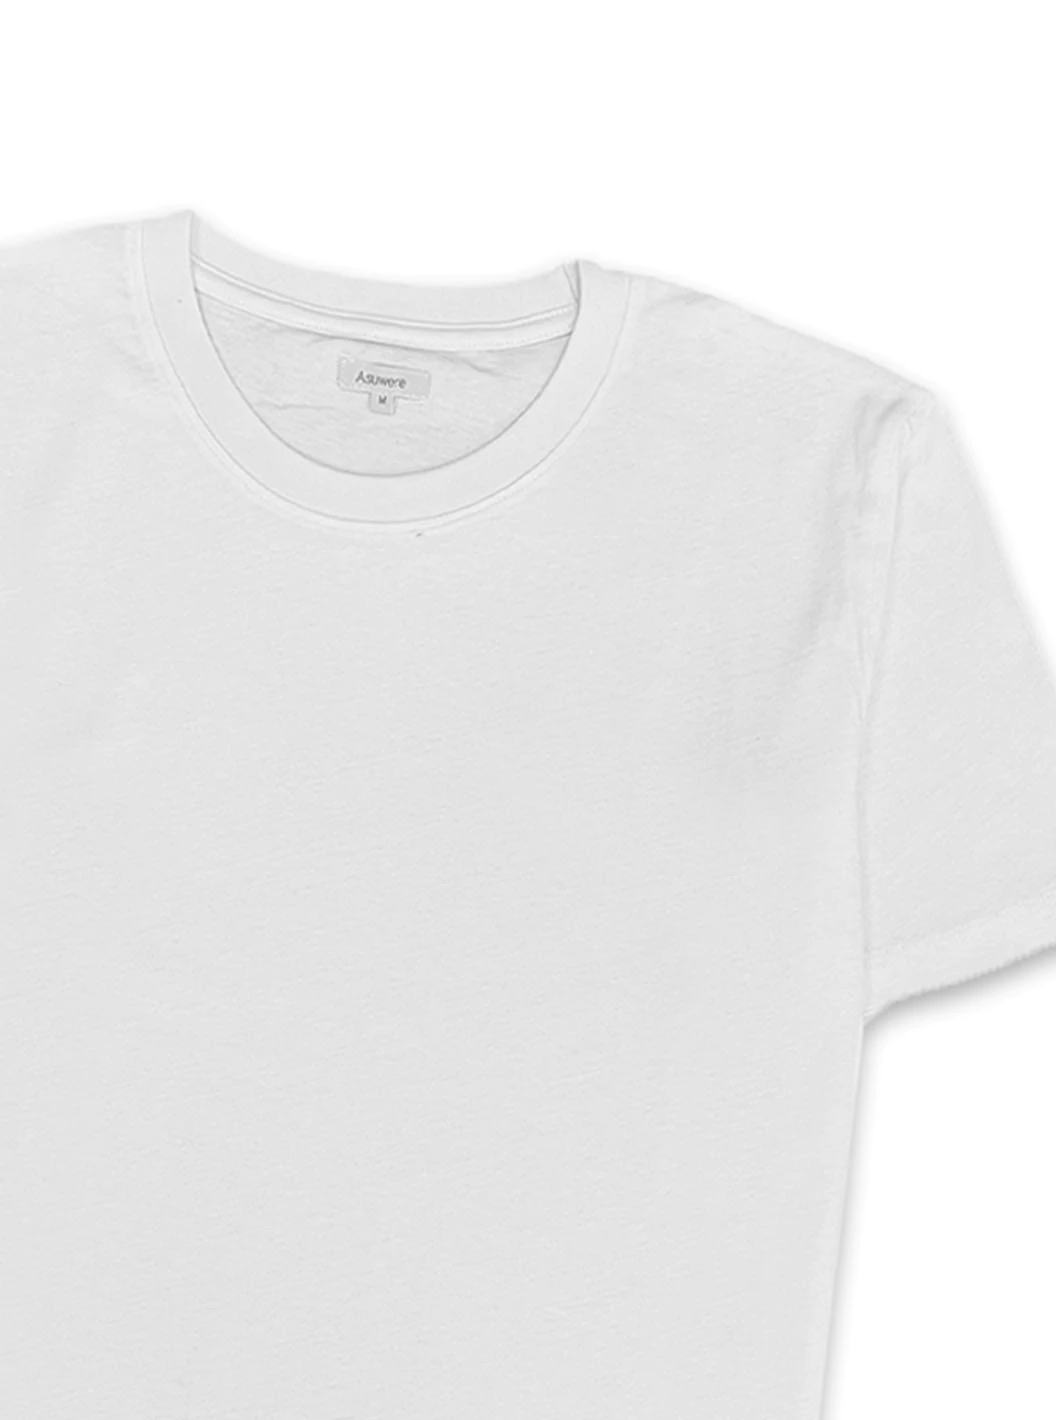 Recycled Cotton Tee - White